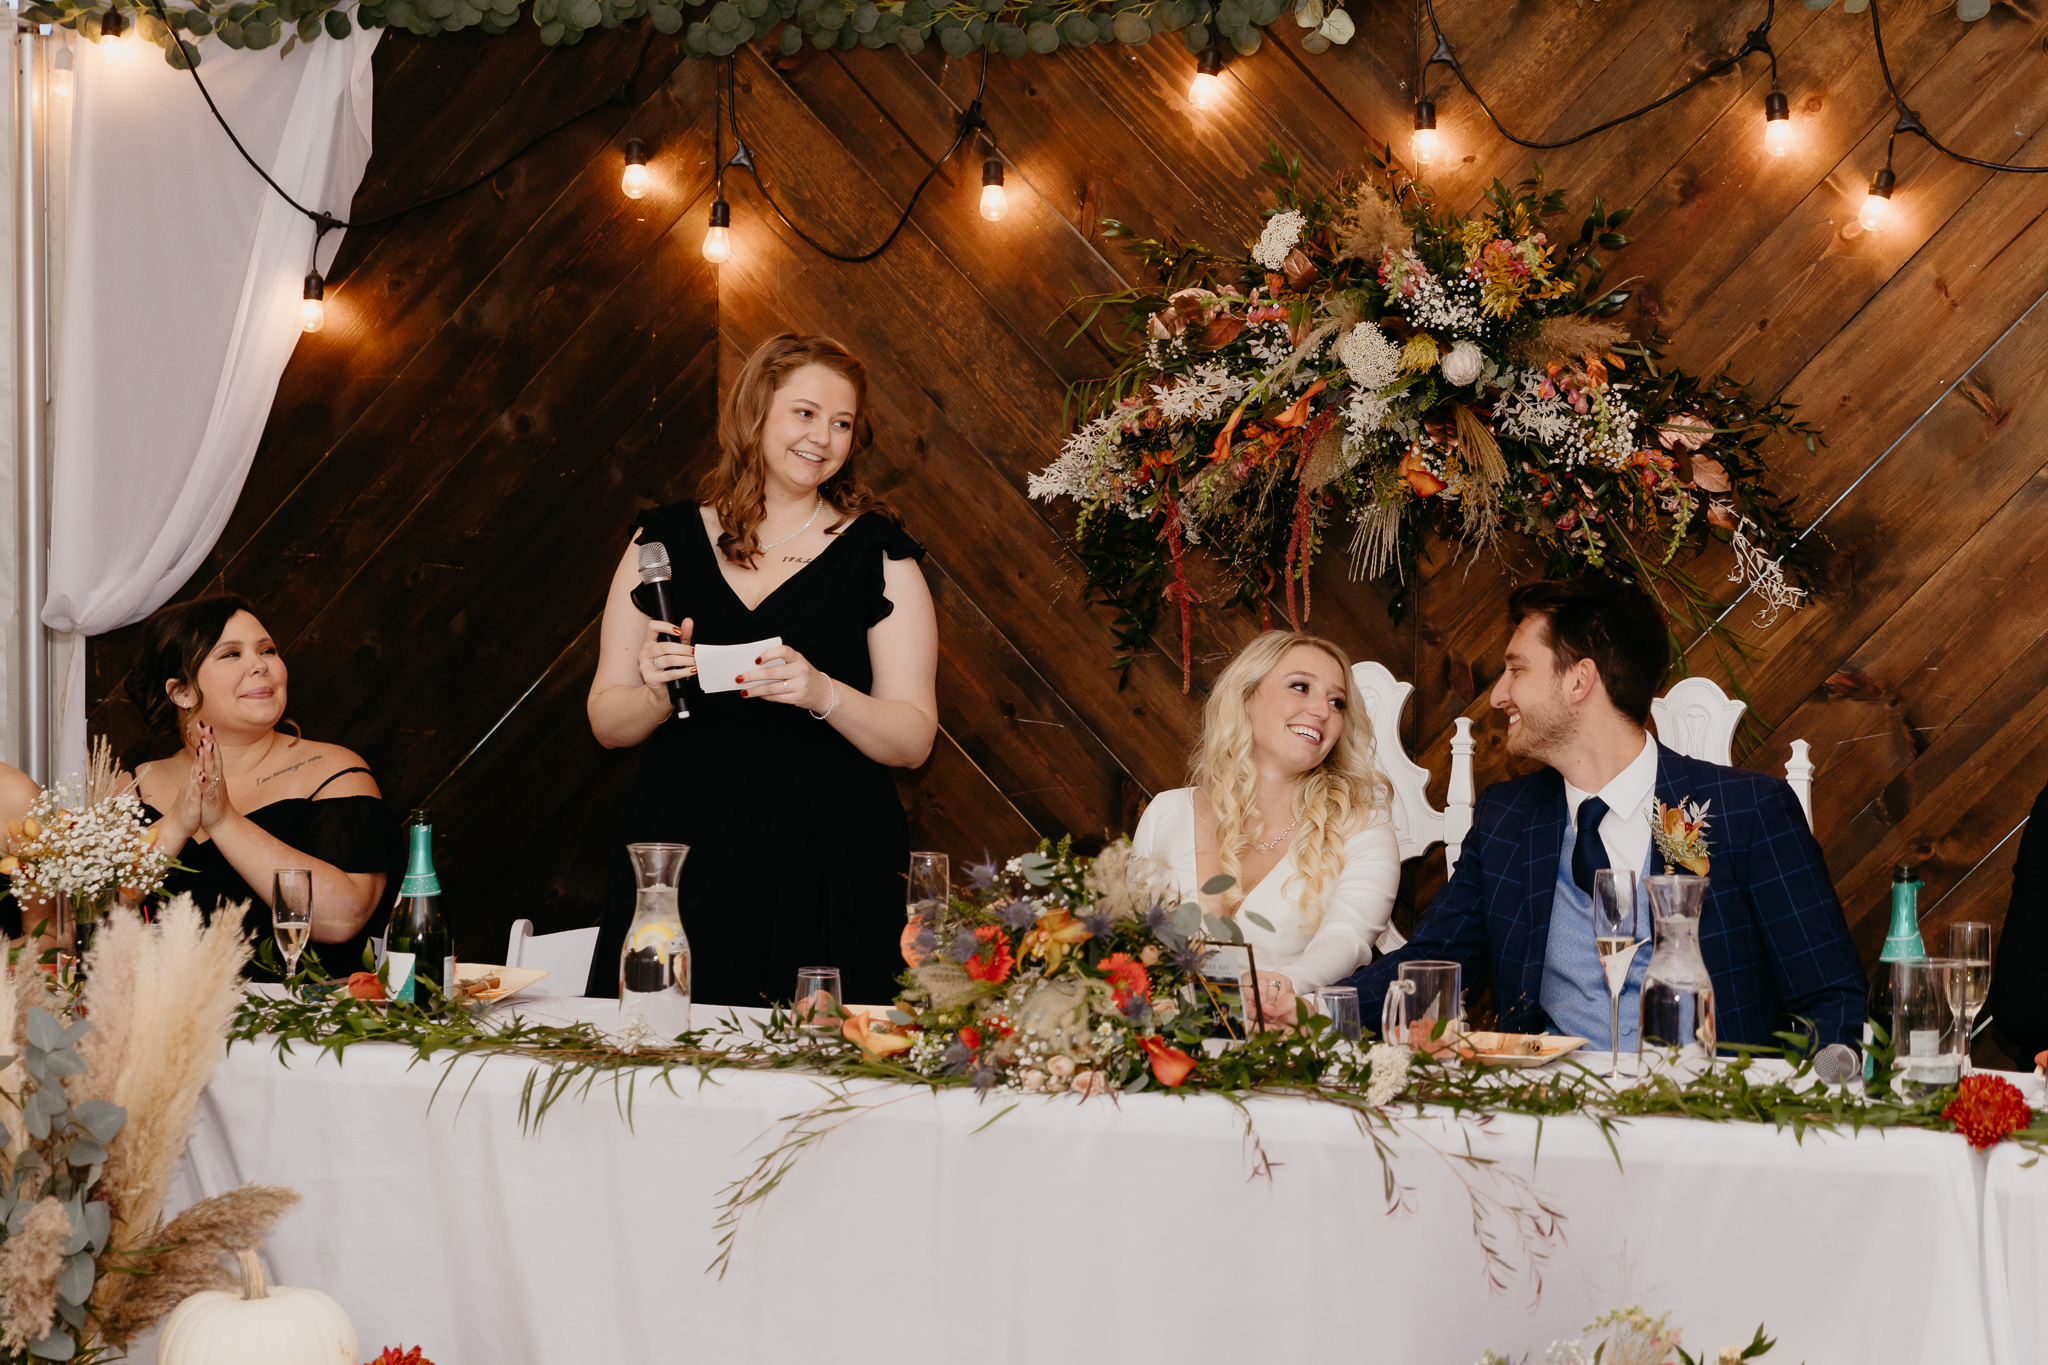 Groom and bride sitting at table, toast the maid of honor after giving a speech in a white tent wedding